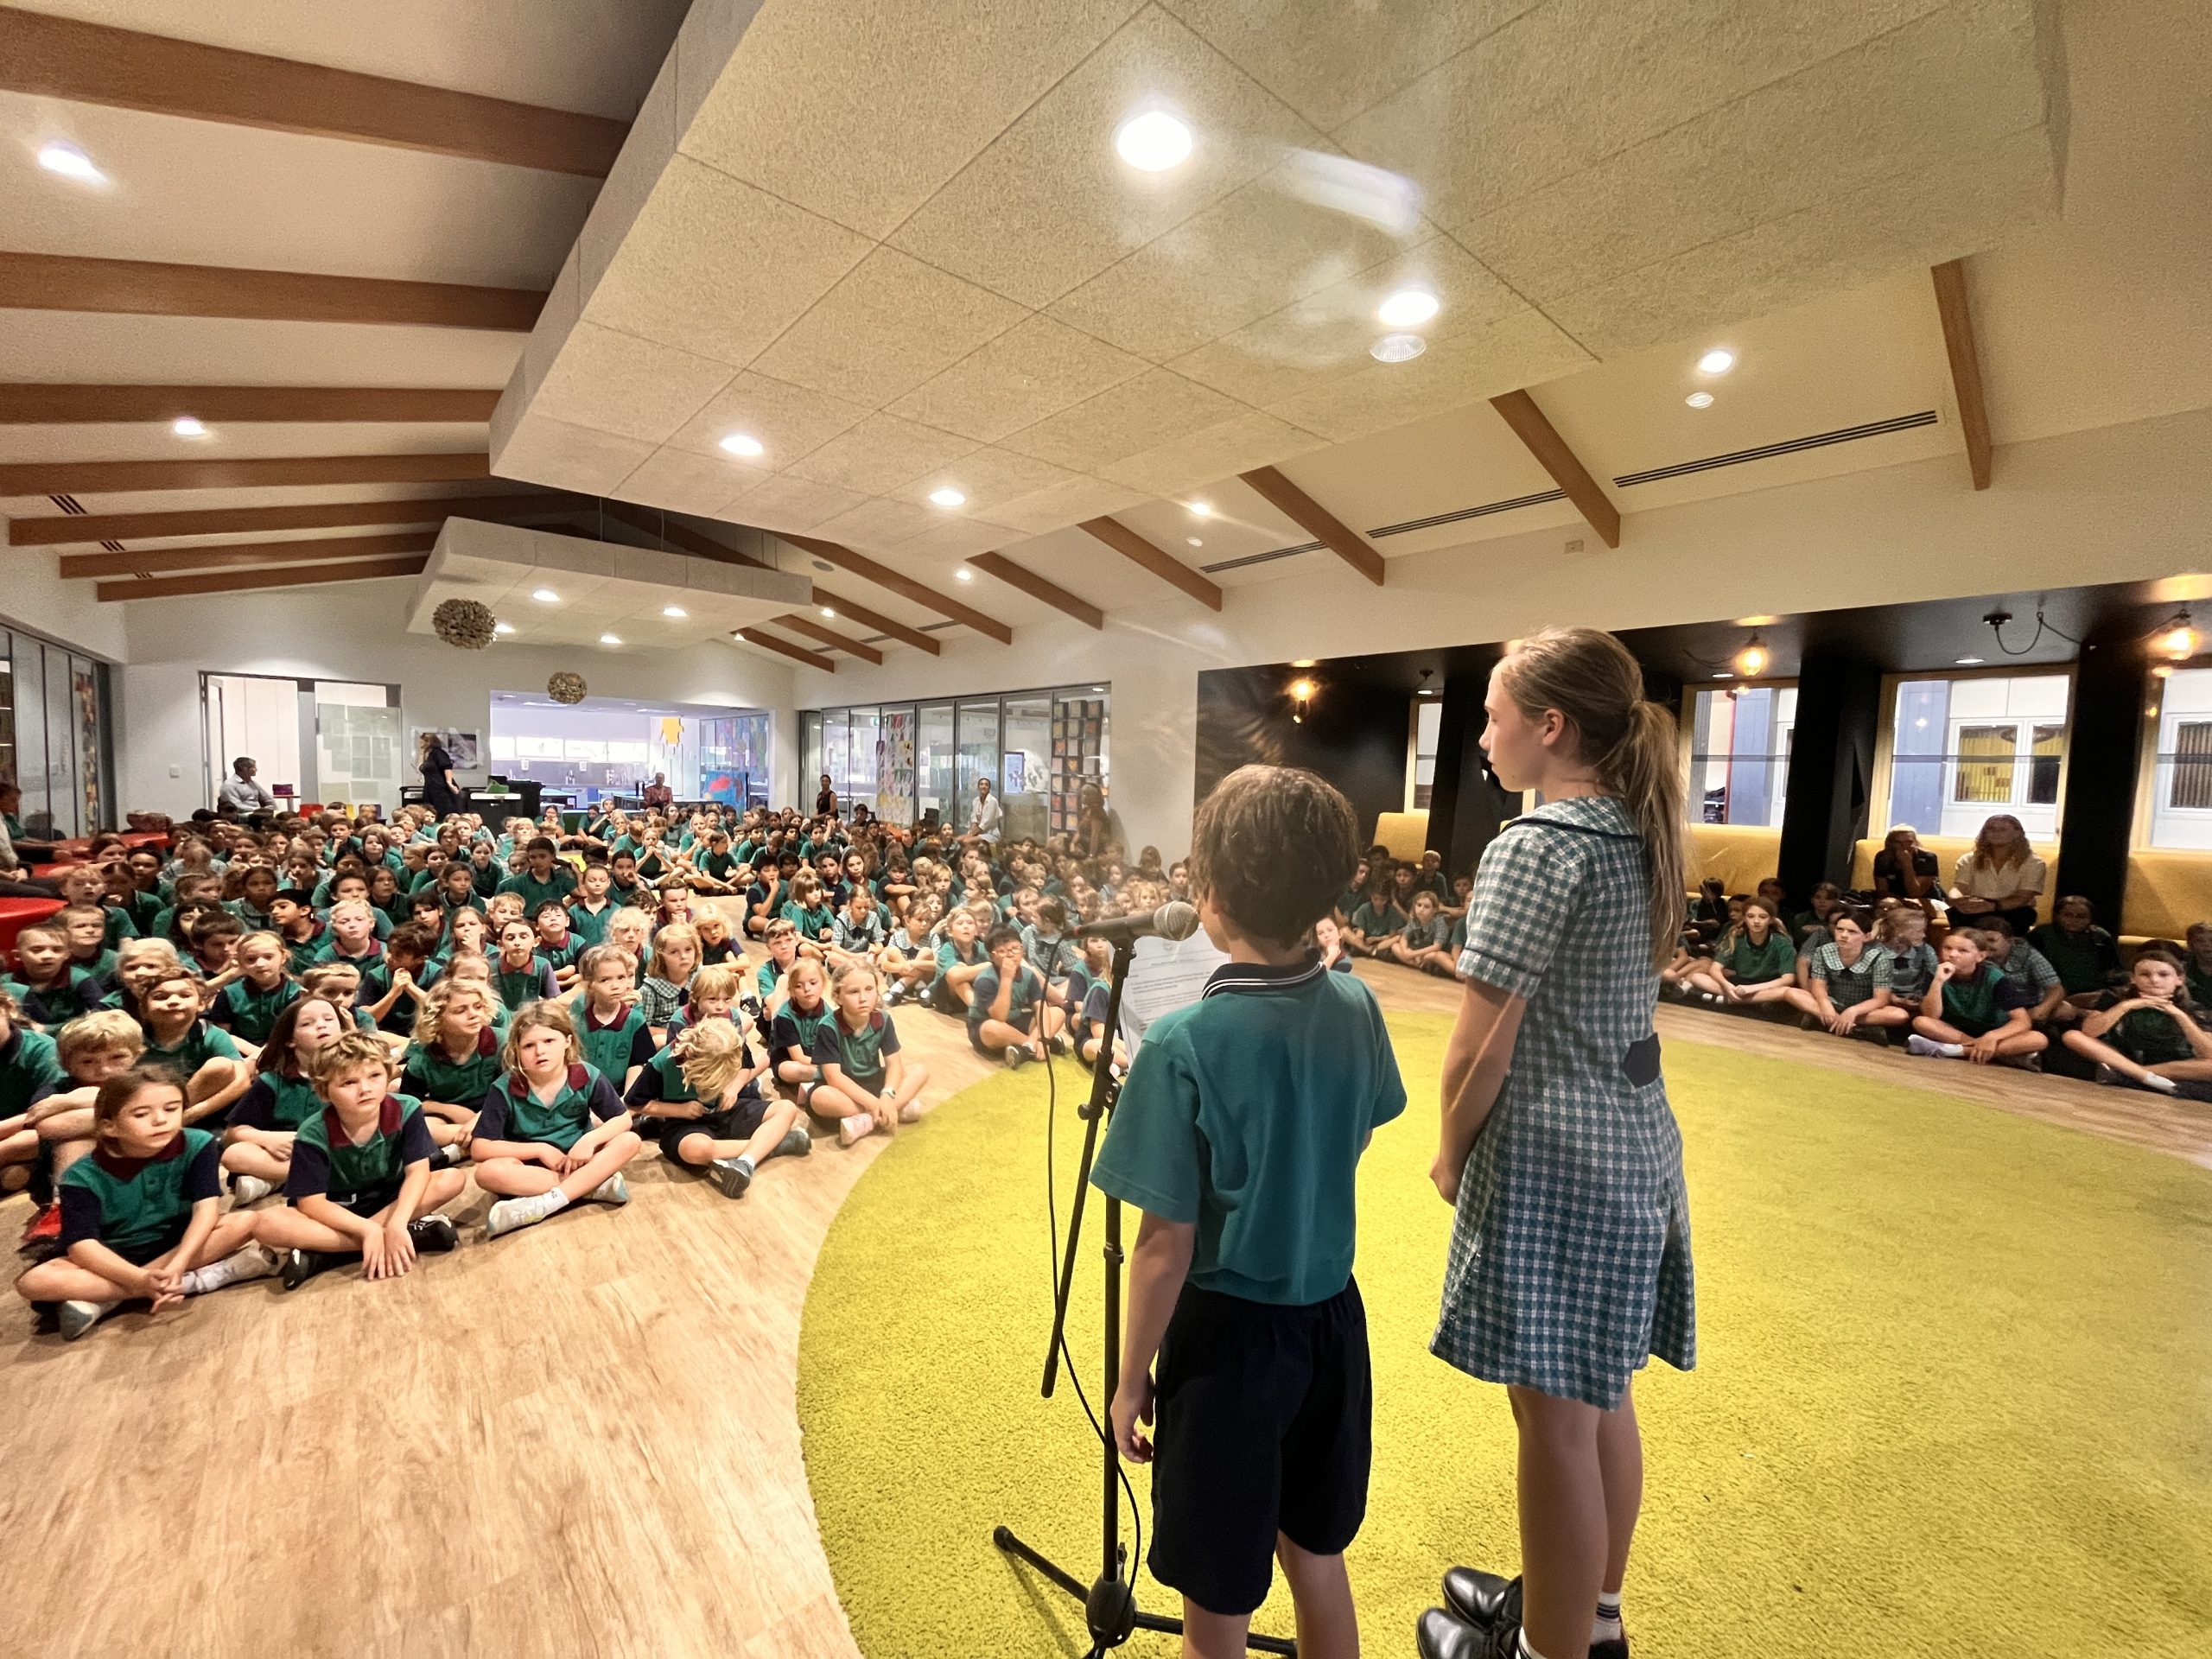 Our Primary Captains Freya Hansen and Will Davis leading this week's Primary Assembly